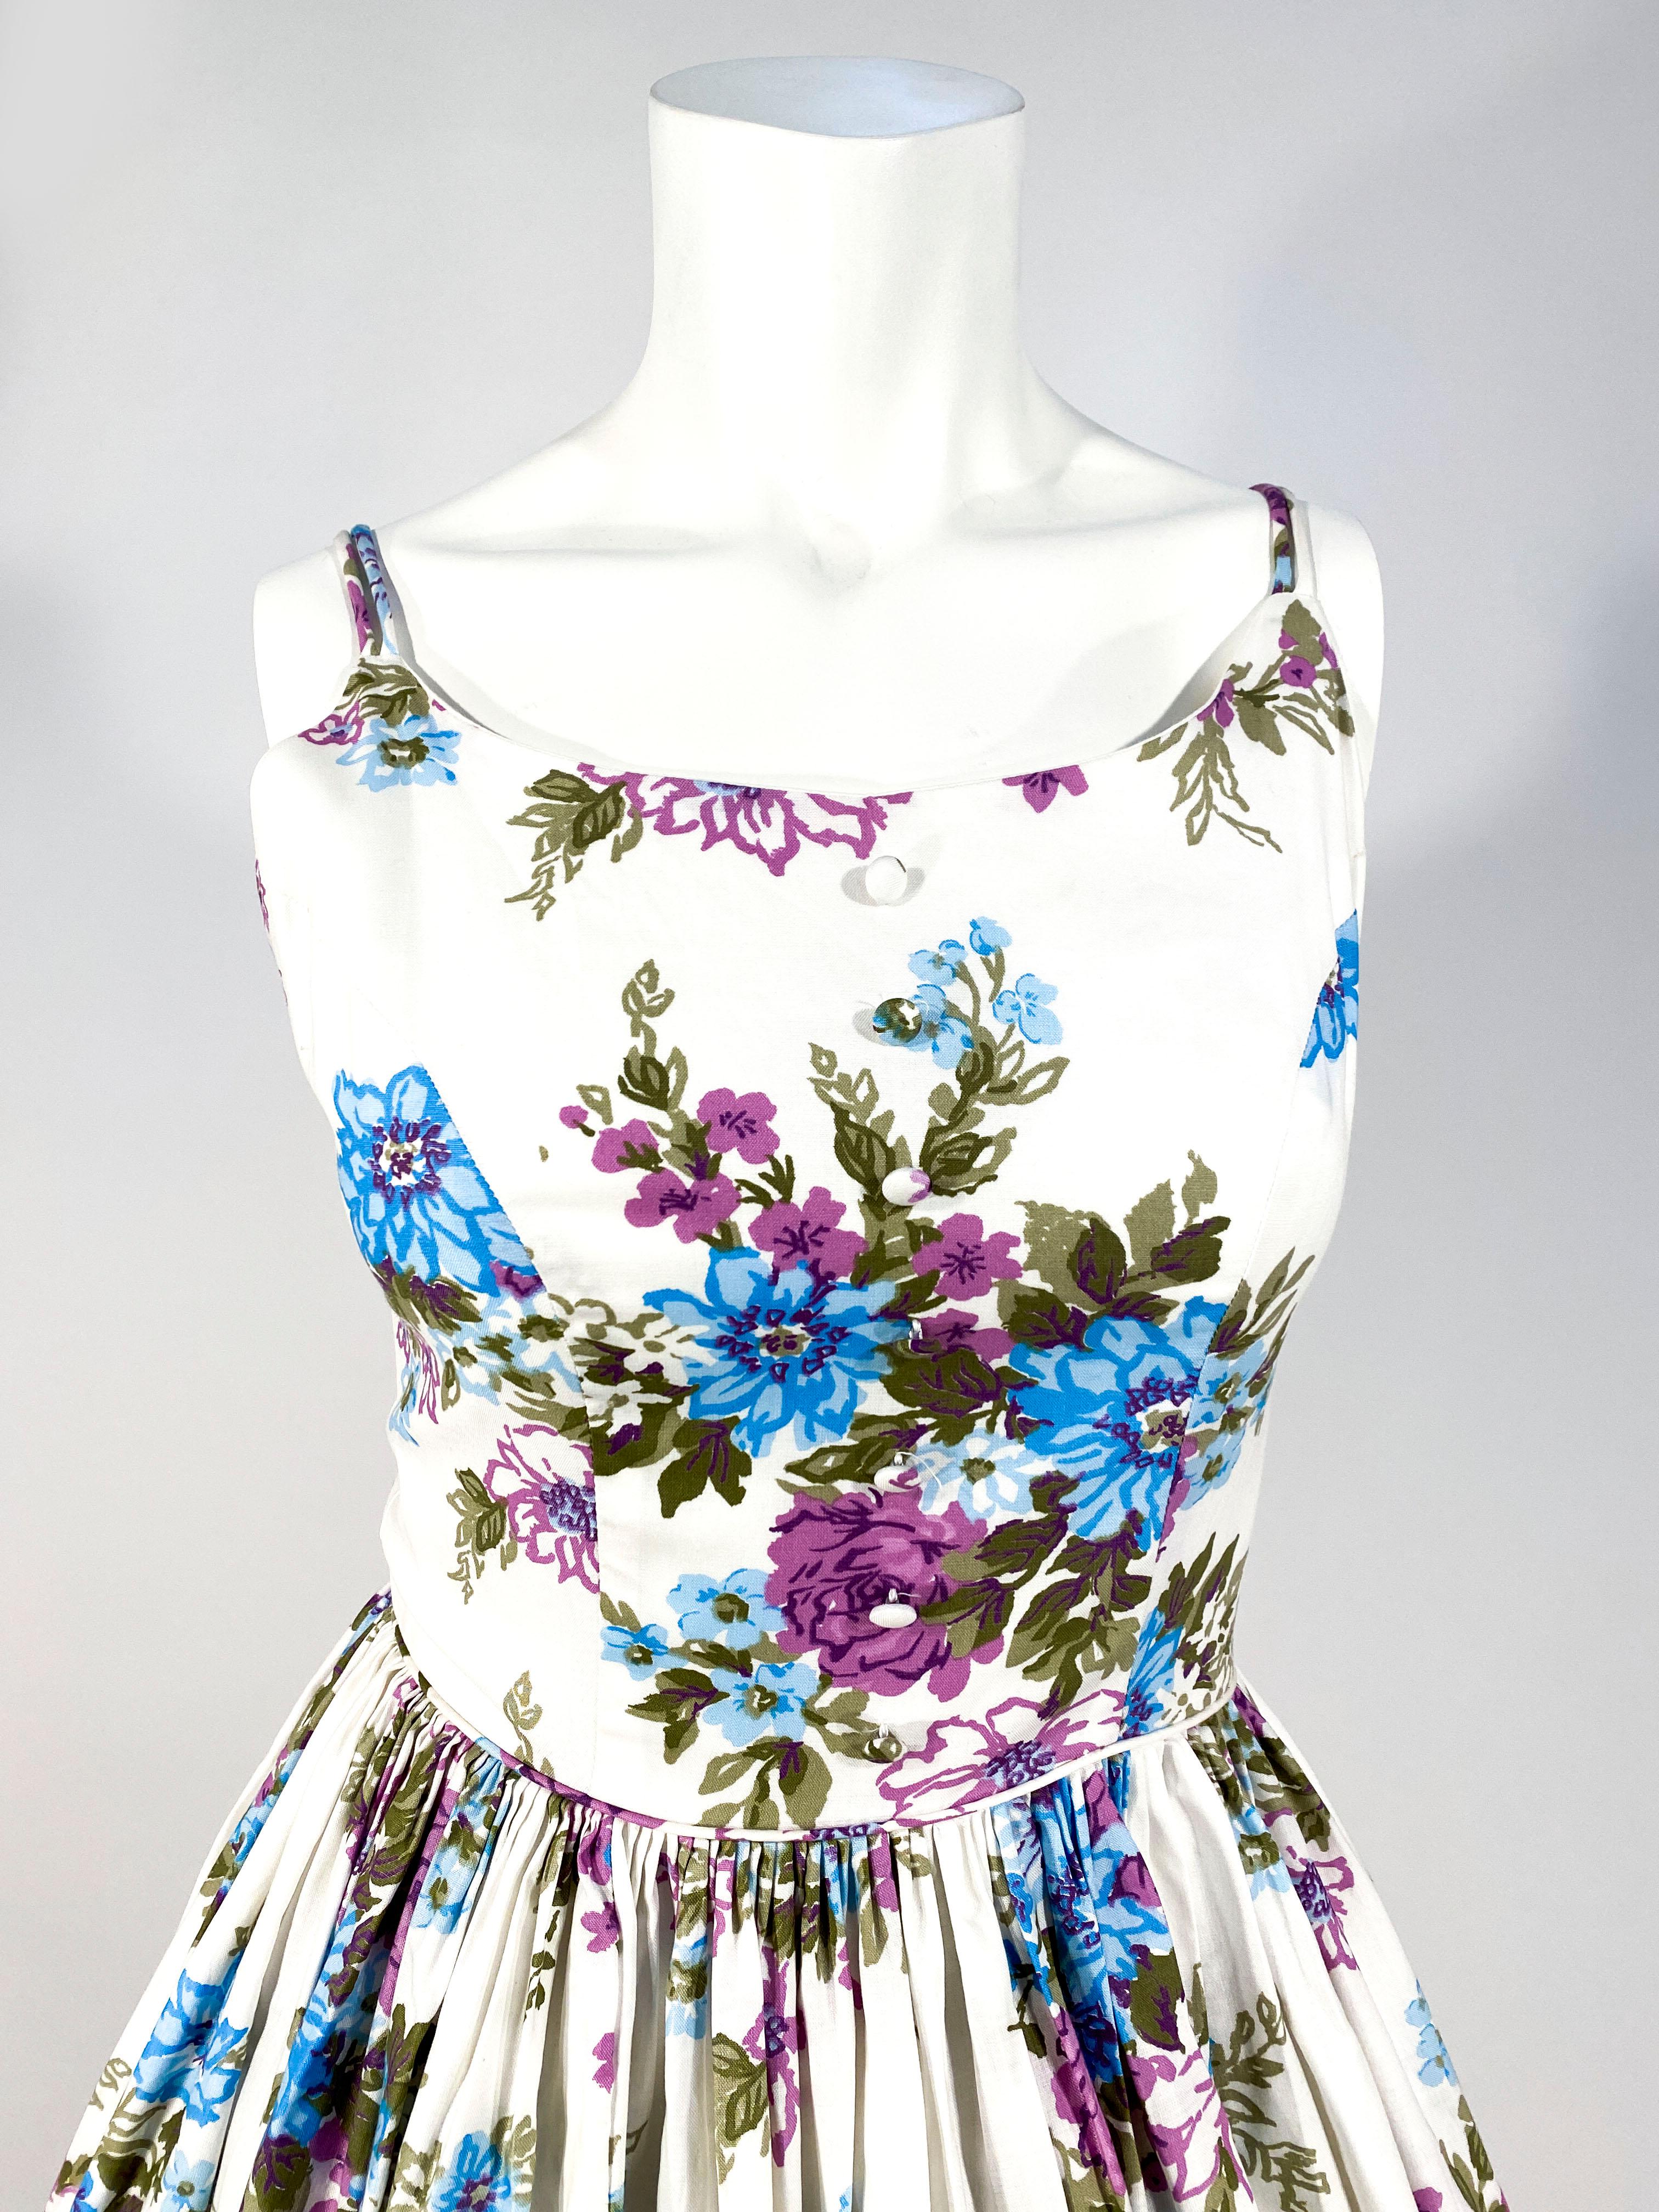 1950s Handmade cotton floral printed day dress featuring tones of aqua, purples and greens on a white field. The torso is fitted to a very full pleated skirt starting at the waist. The bodice has hand-covered button decorations the is lined in the